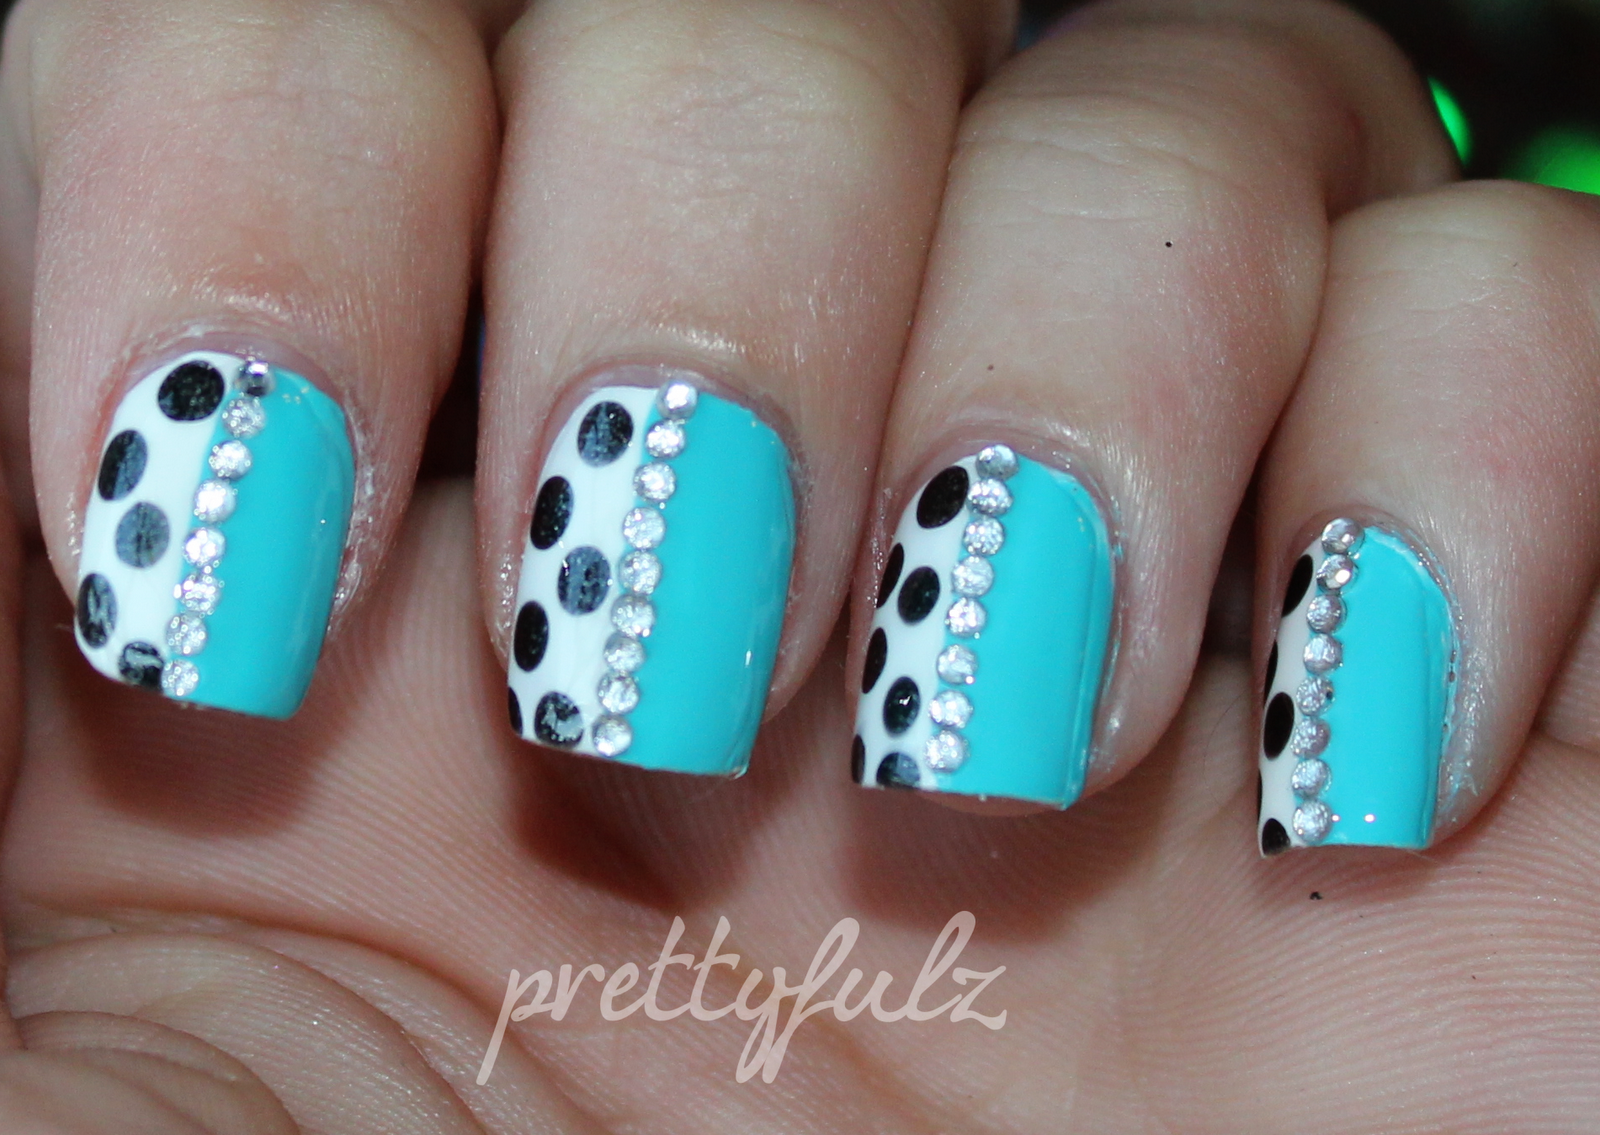 2. Cute Pink and White Polka Dot Nail Design Ideas - wide 6